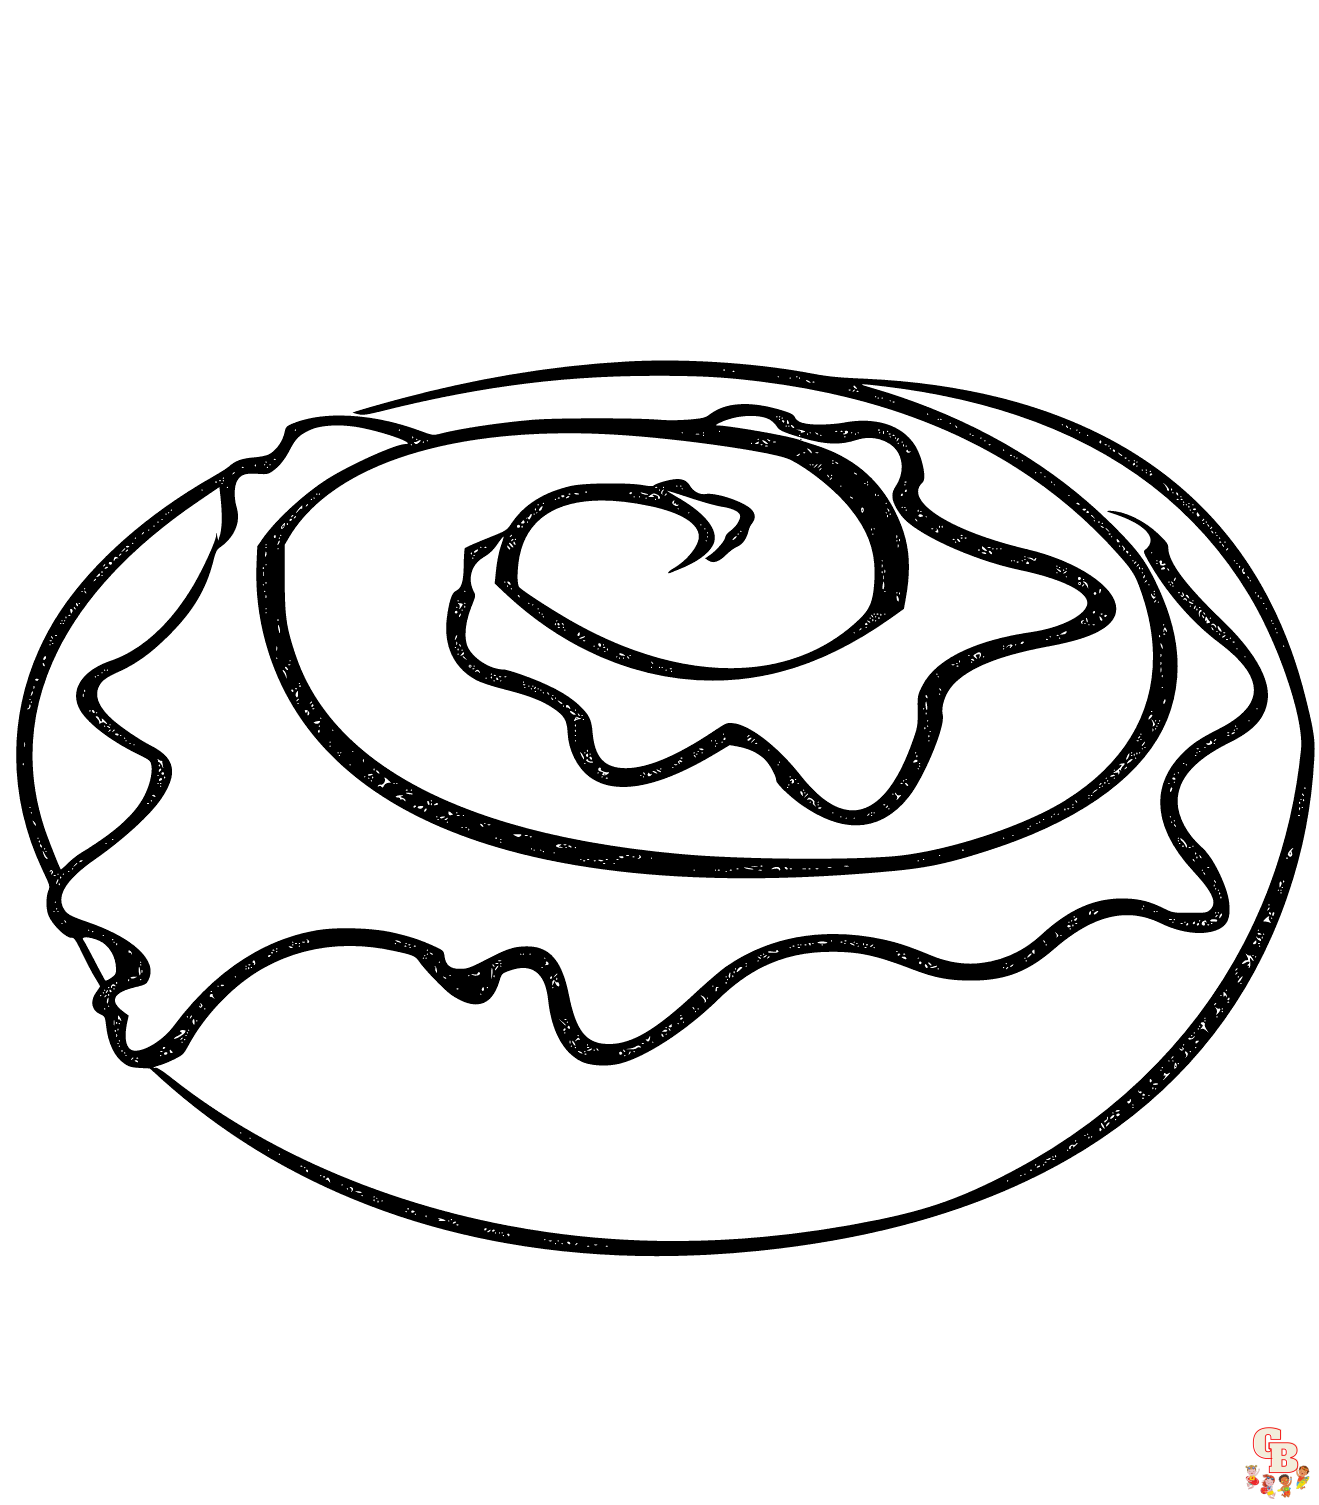 Cinnamon roll Coloring Sheets free